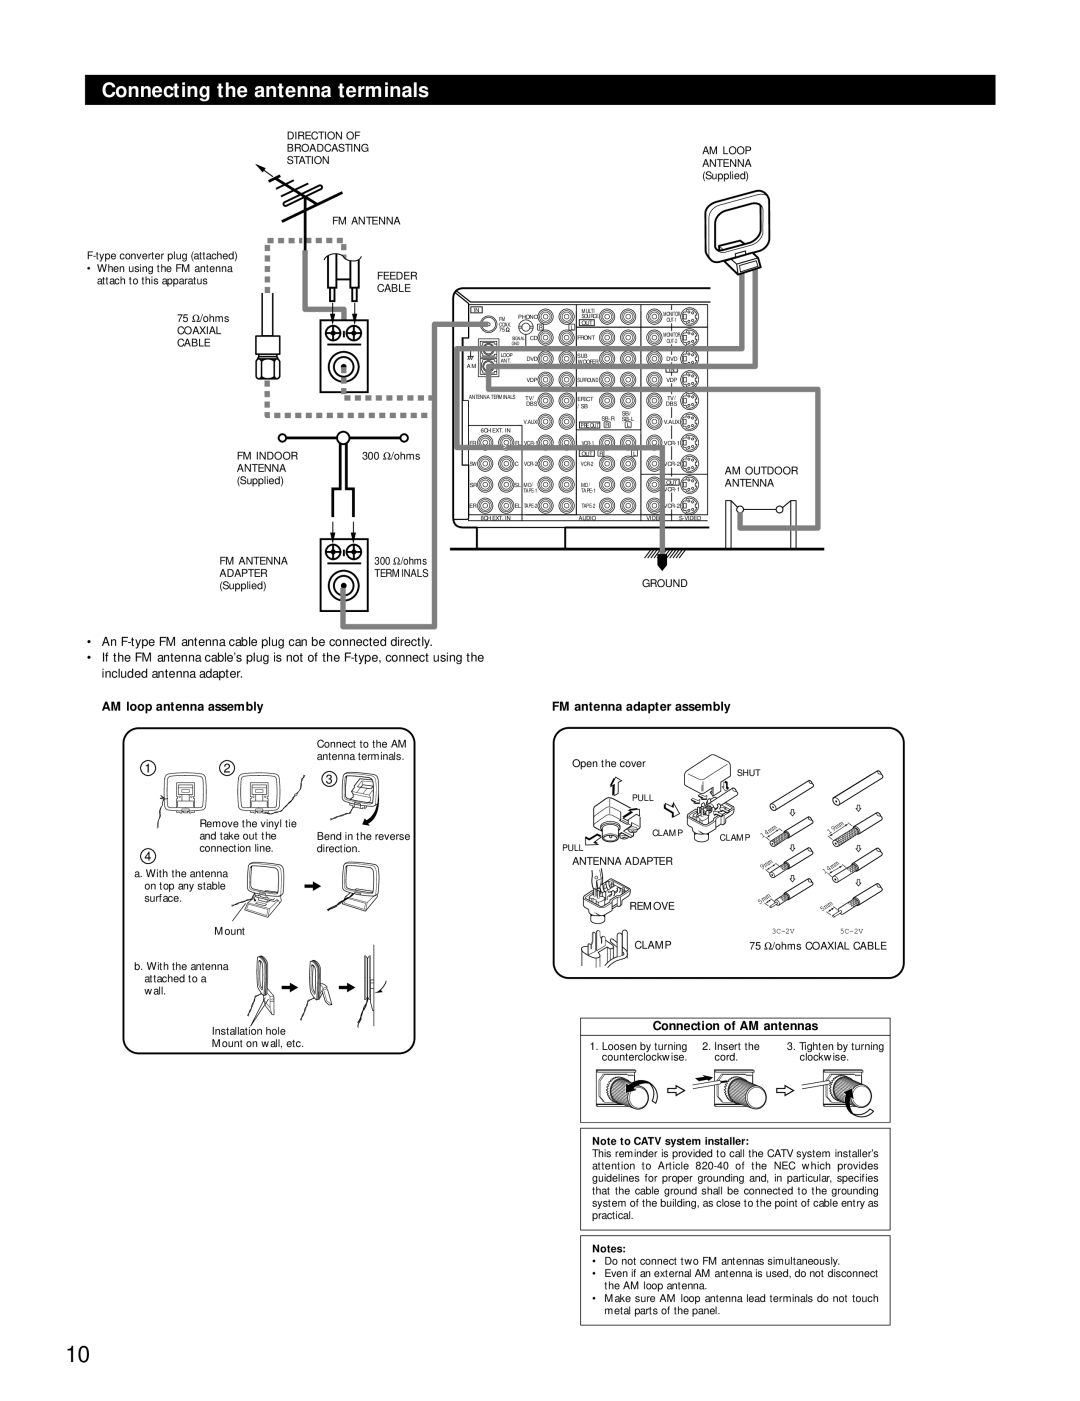 Denon AVR-4800 manual Connecting the antenna terminals, AM loop antenna assembly, FM antenna adapter assembly, Notes 